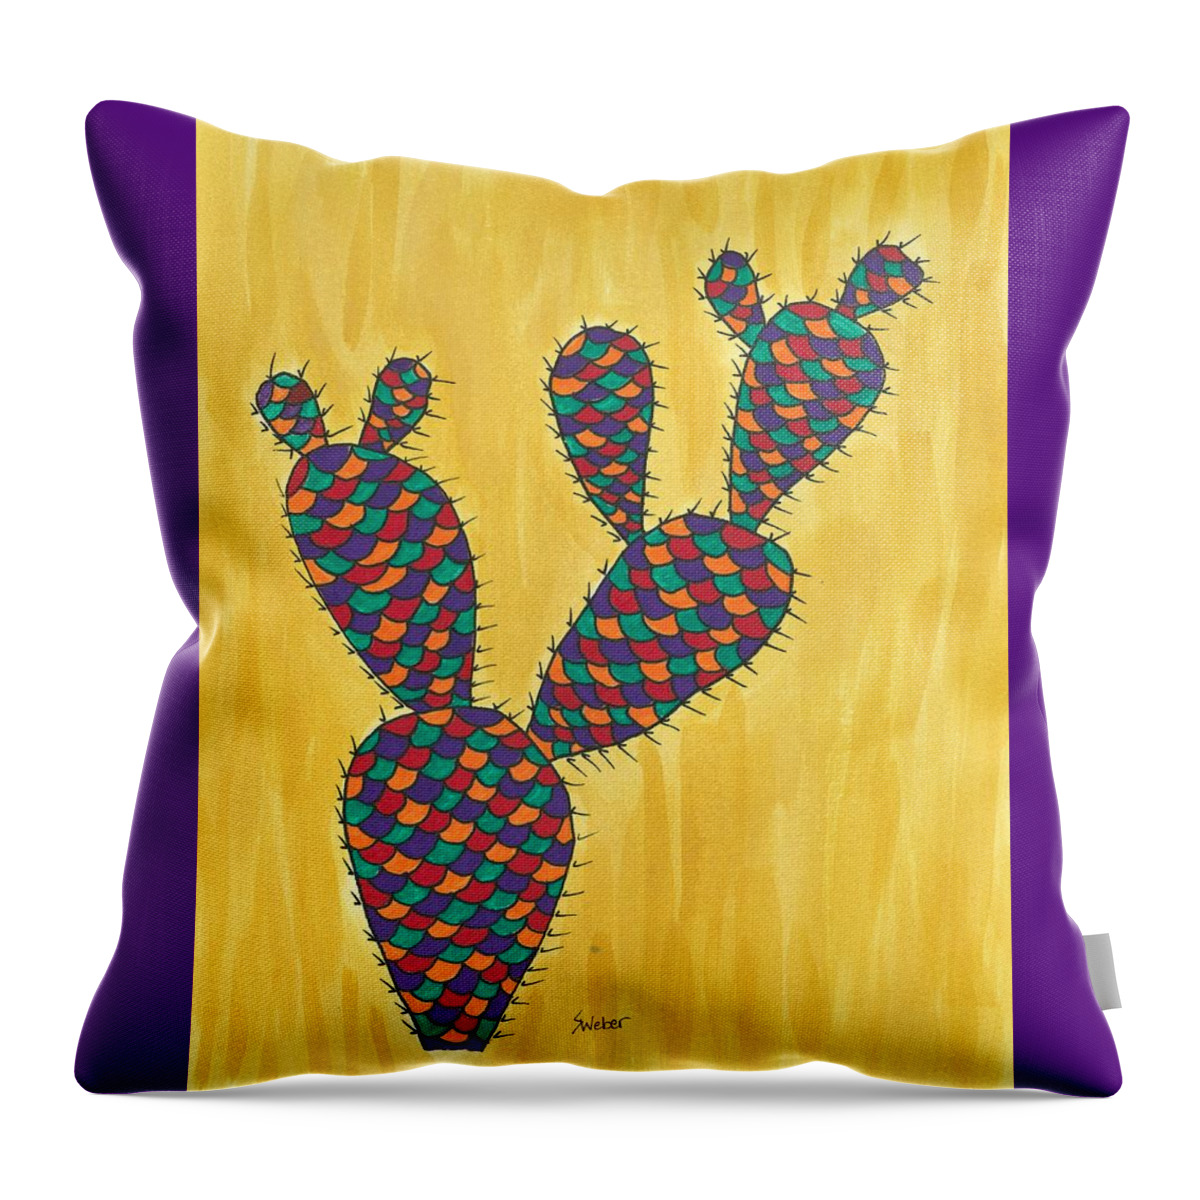 Prickly Pear Cactus Throw Pillow featuring the painting Prickly Pear Cactus Paradise by Susie Weber